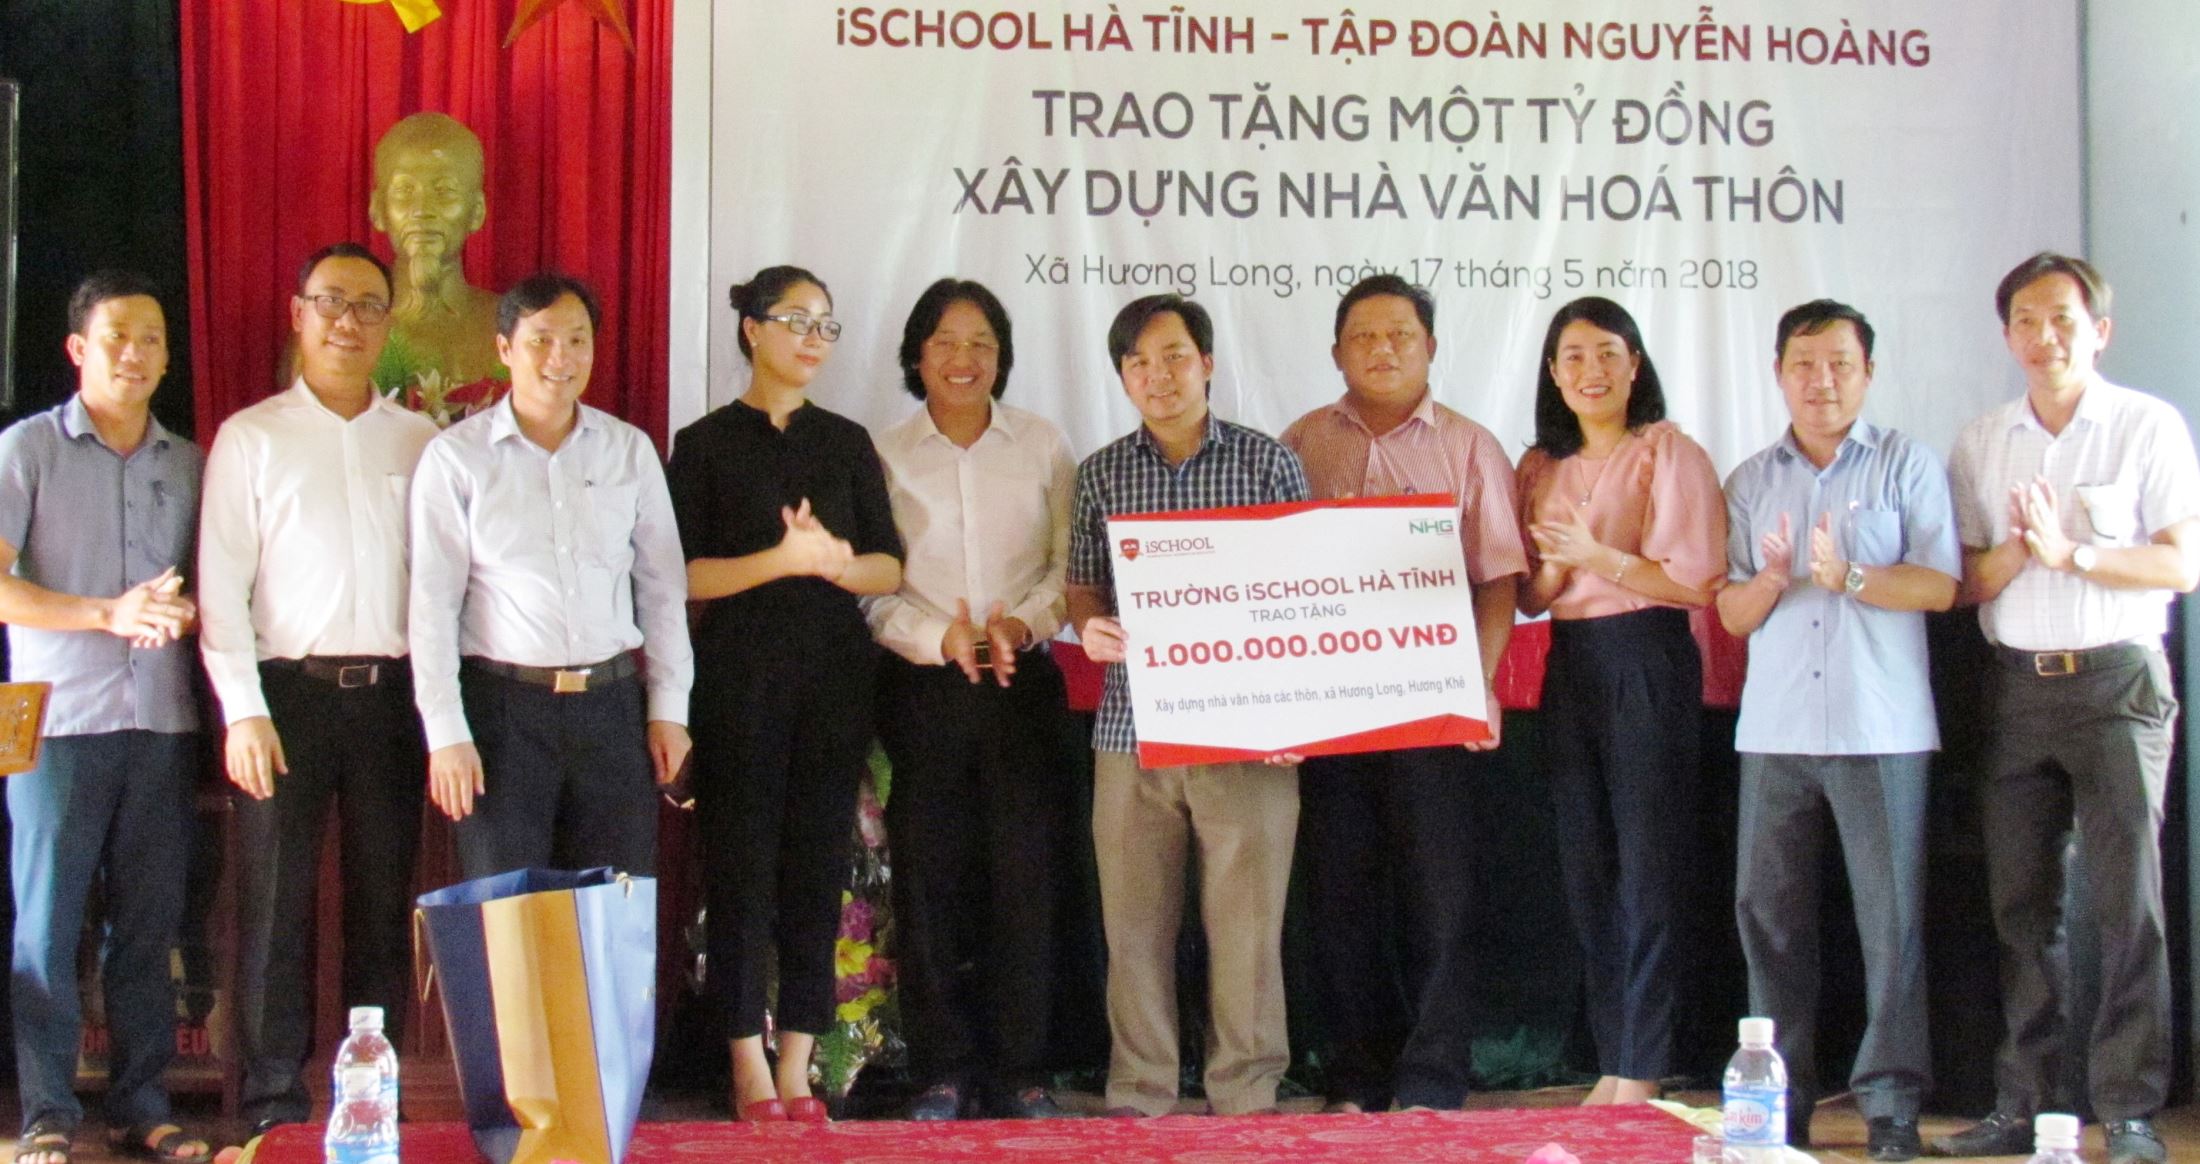 The delegation with the Board of leaders of Ha Tinh Province and Huong Long commune